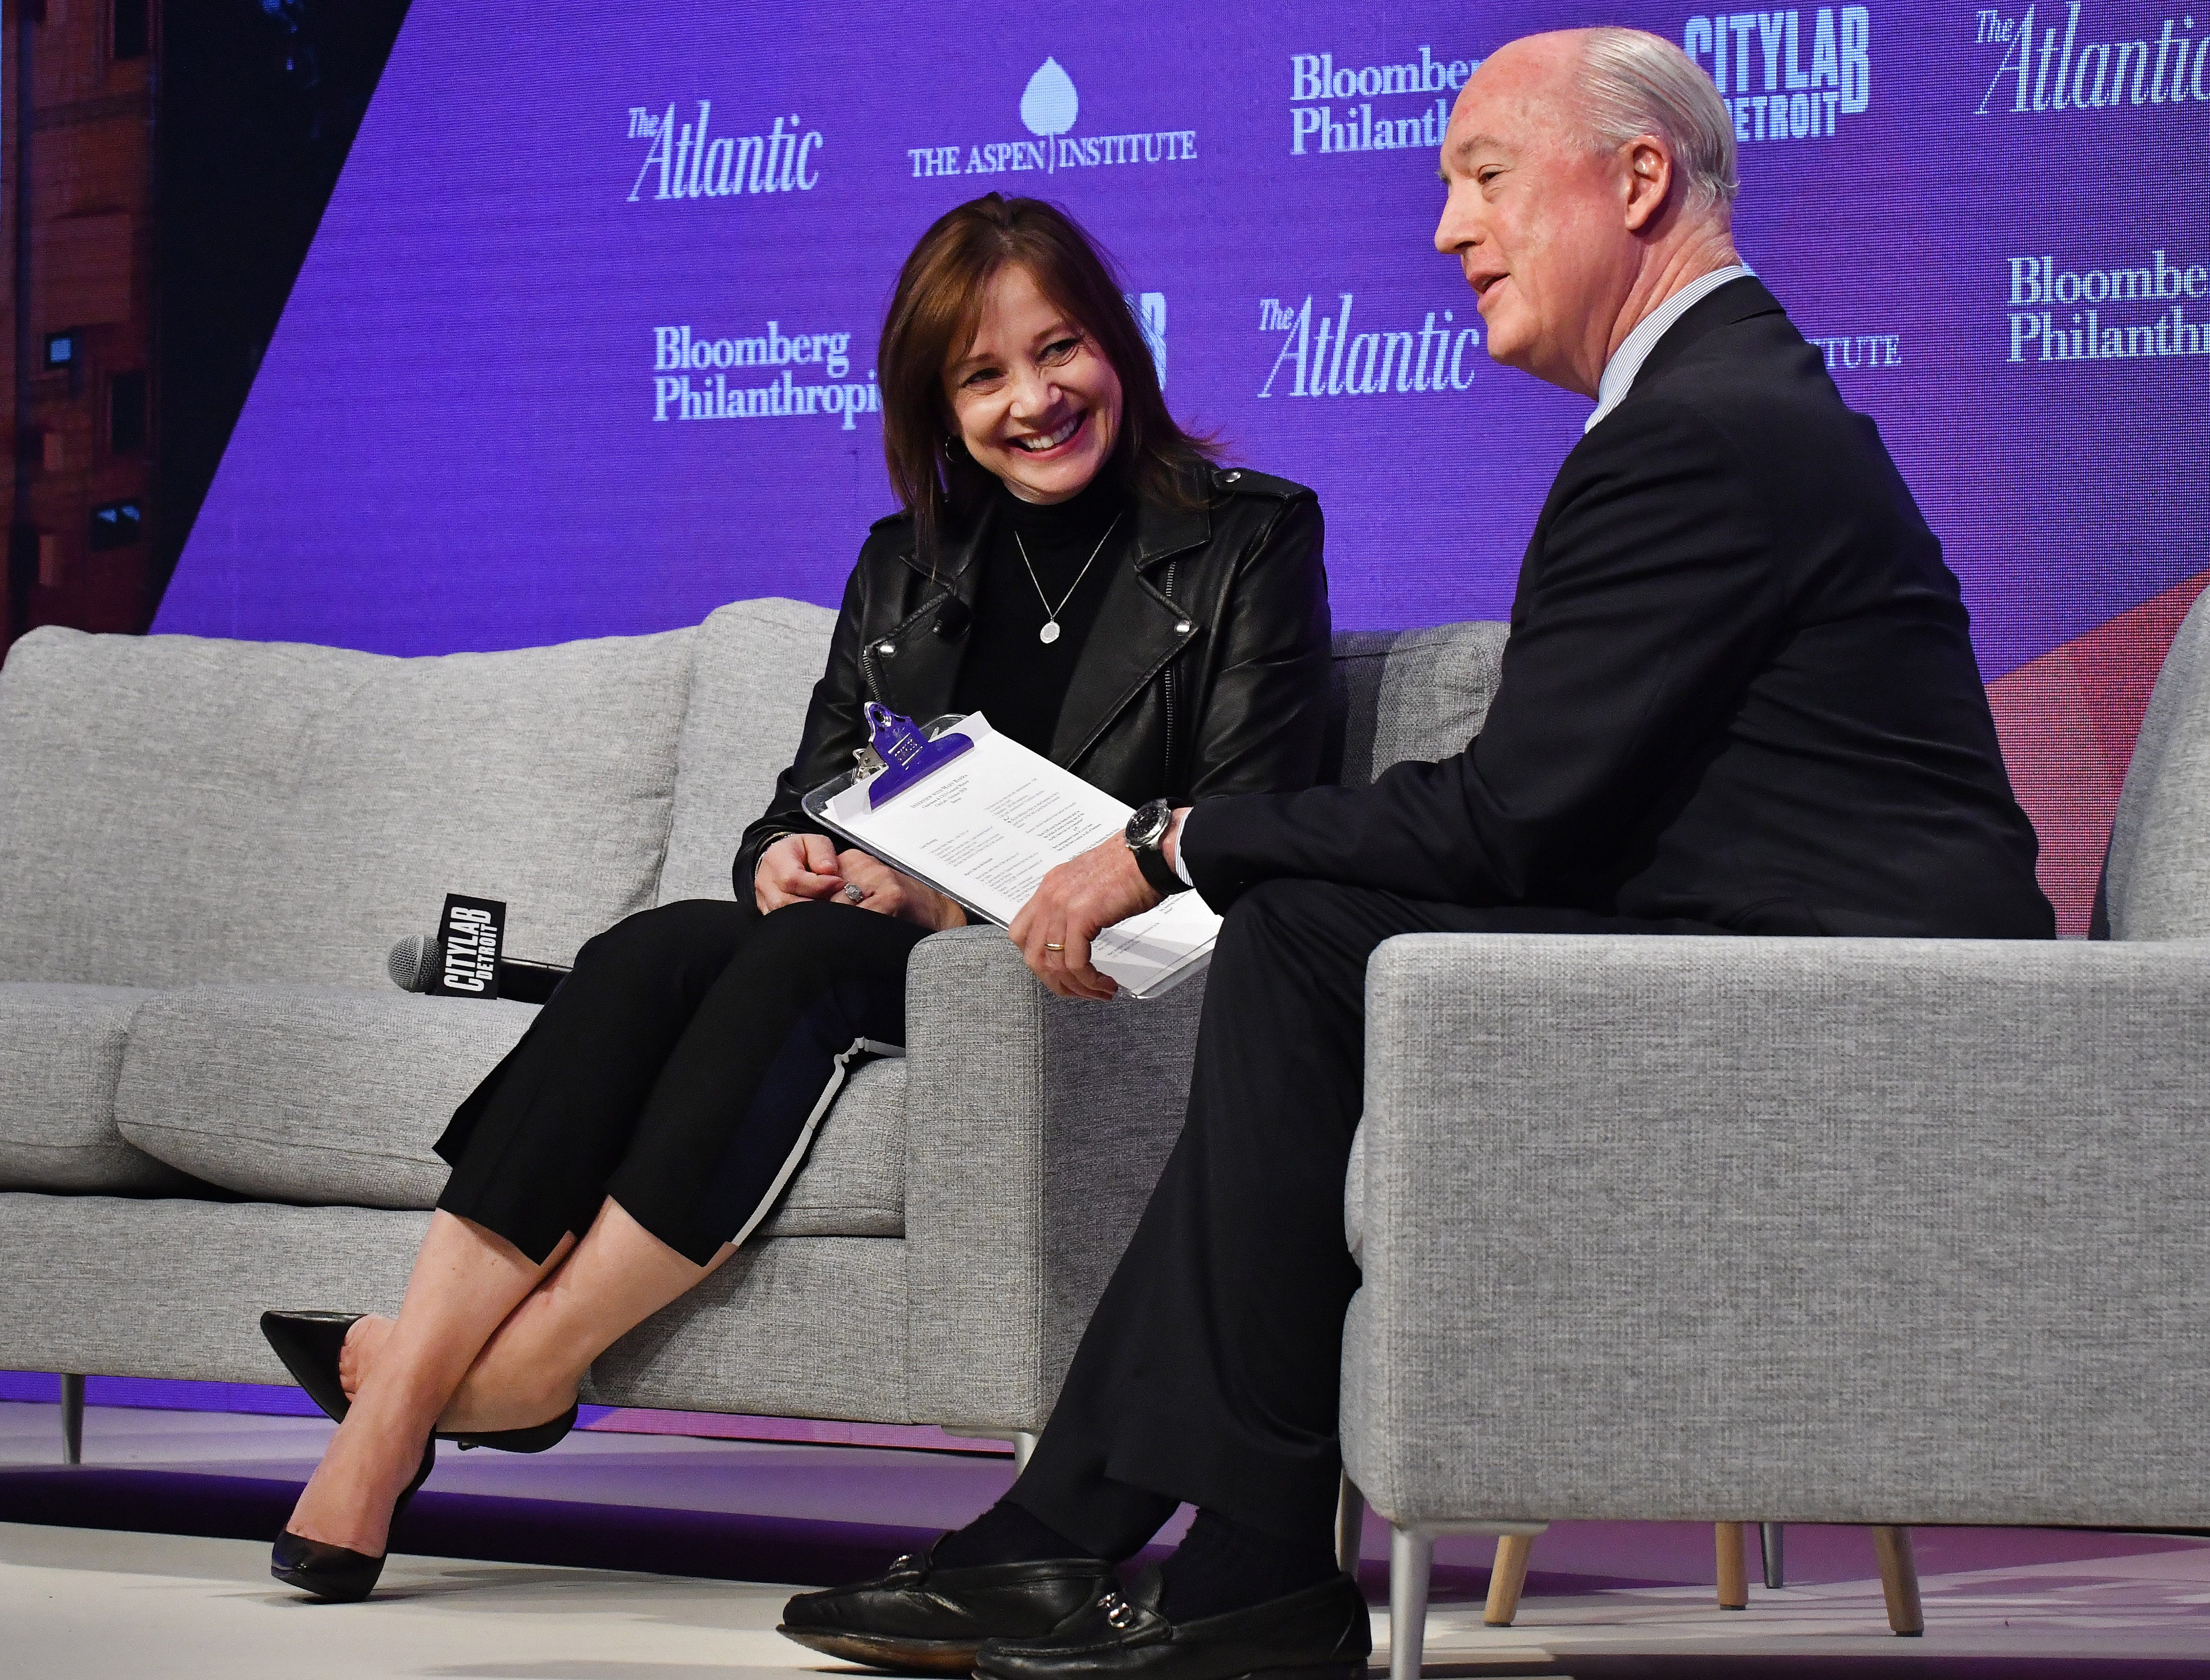 Under CEO Mary Barra, left, GM is delivering fat truck and SUV profit margins in North America, better positioning the automaker to invest in new technologies in the mobility, autonomy and electrification spaces.